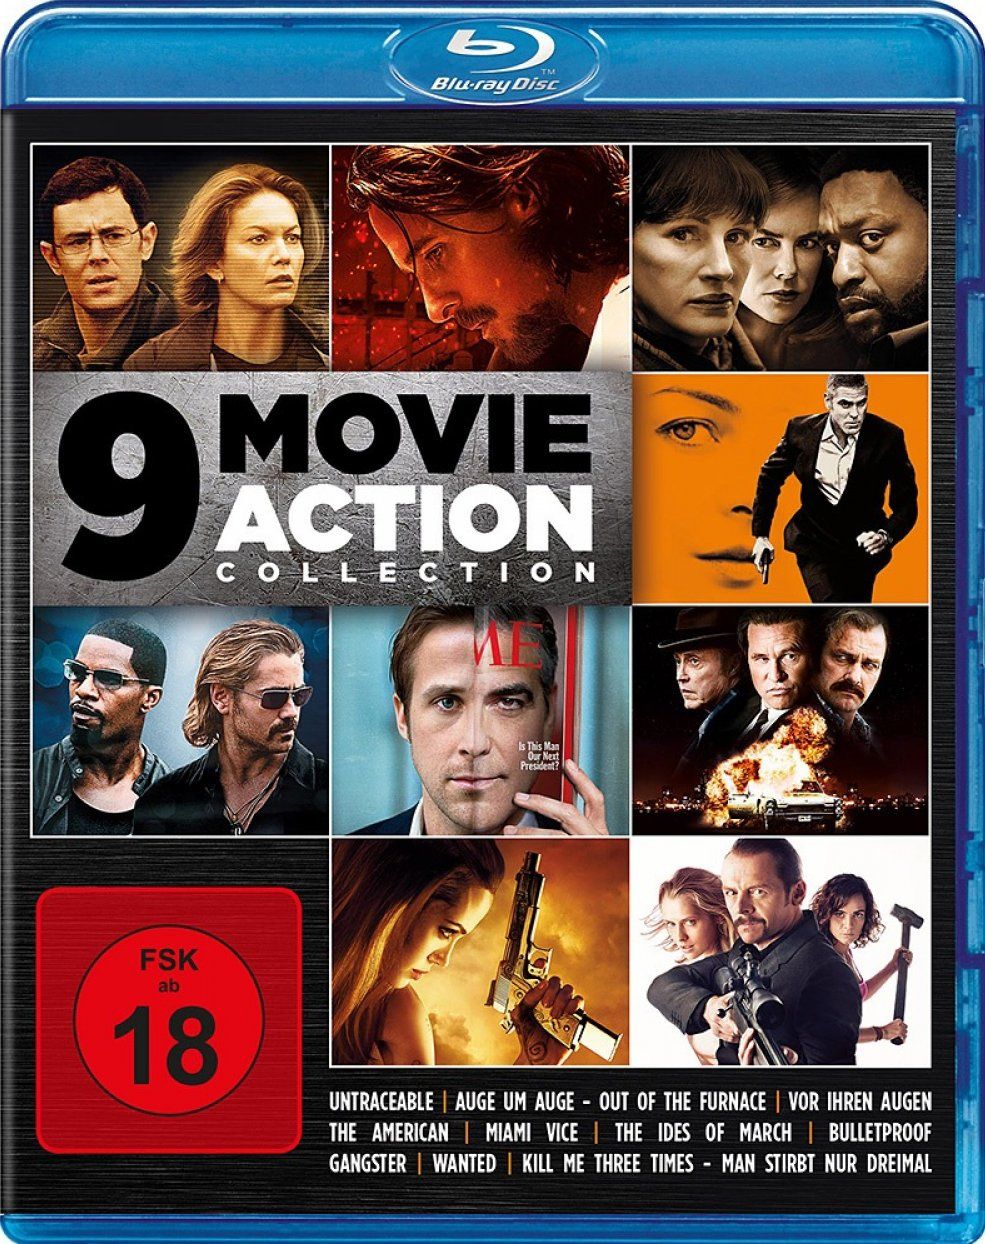 9 Movie Action Collection (3 Discs) (BLURAY)